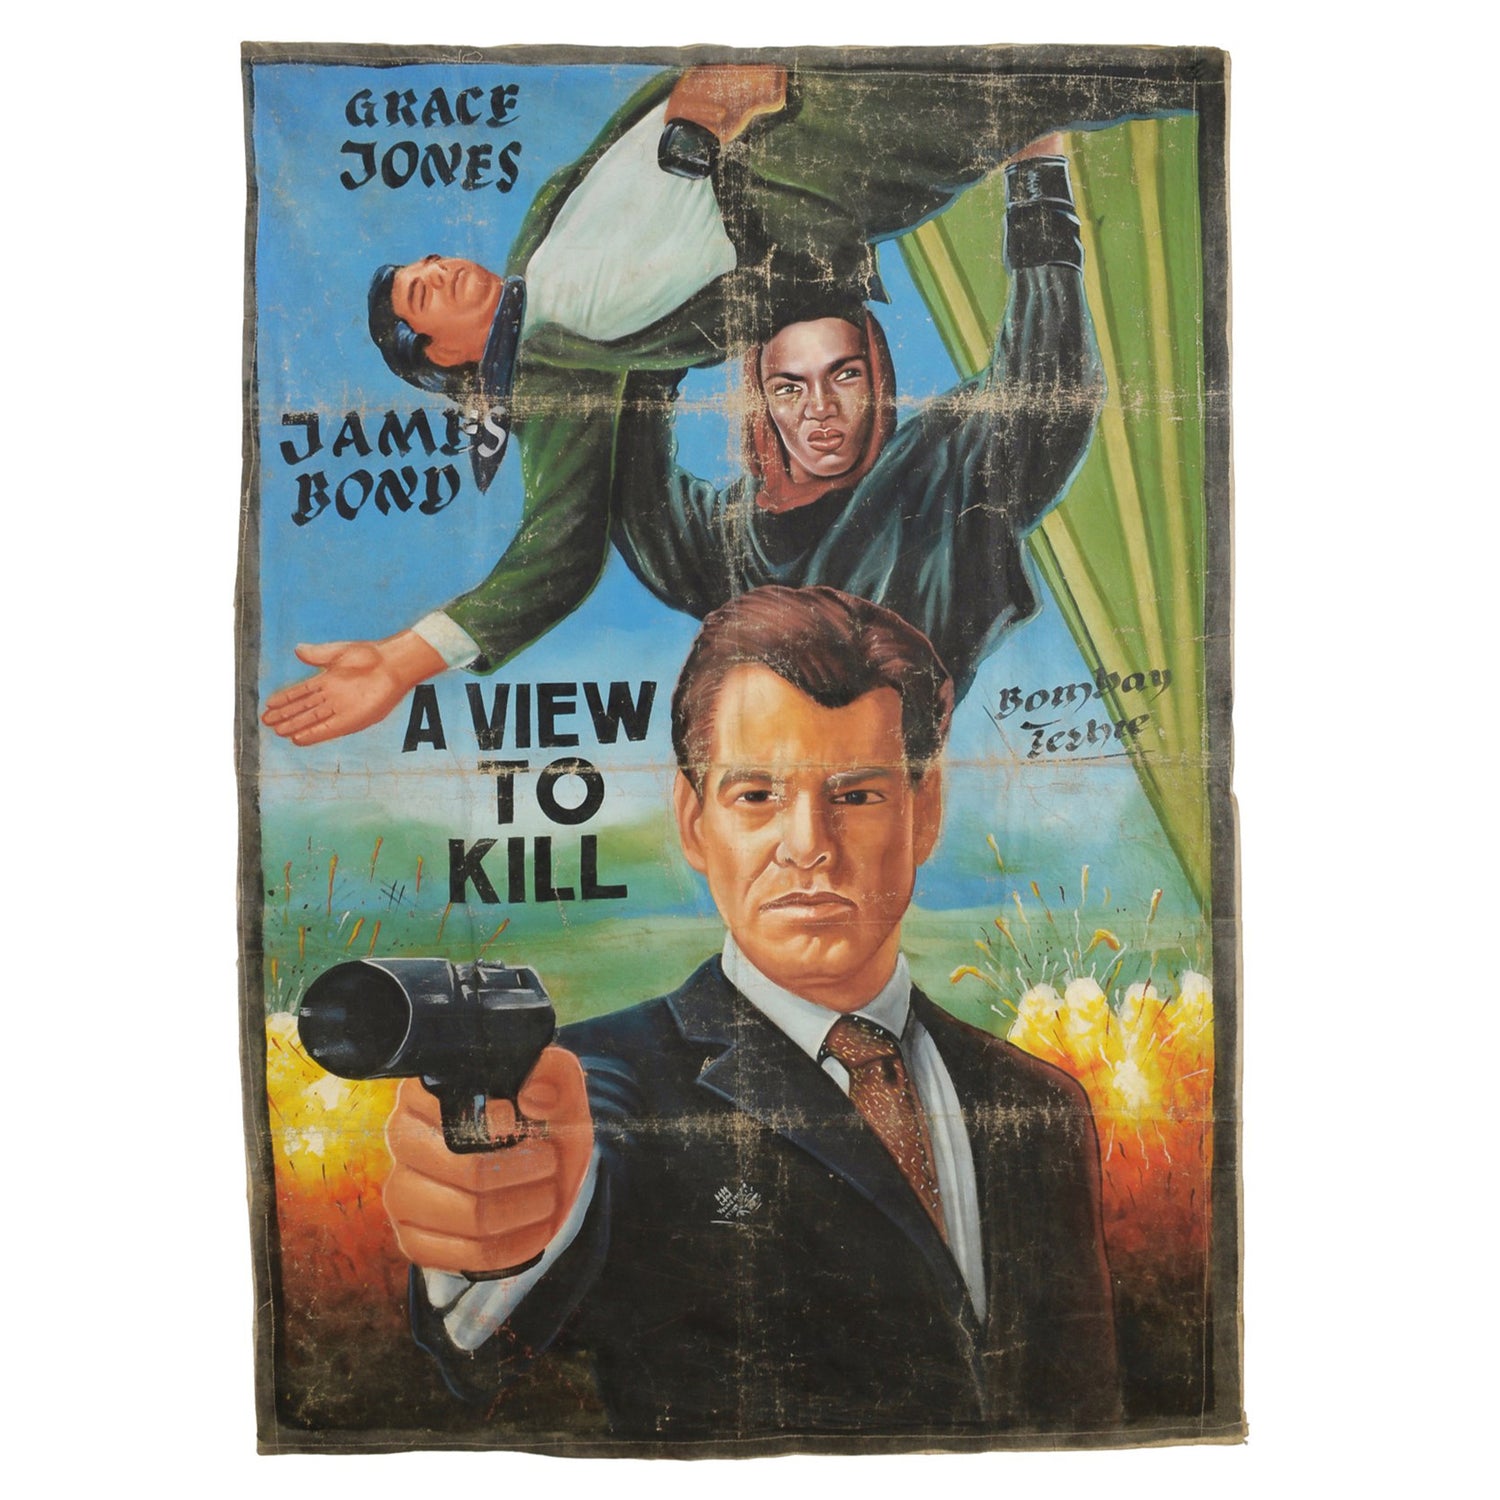 A VIEW TO KILL MOVIE POSTER 007 JAMES BOND ΖΩΓΡΑΦΙΣΜΕΝΟ ΣΤΗΝ ΓΚΑΝΑ